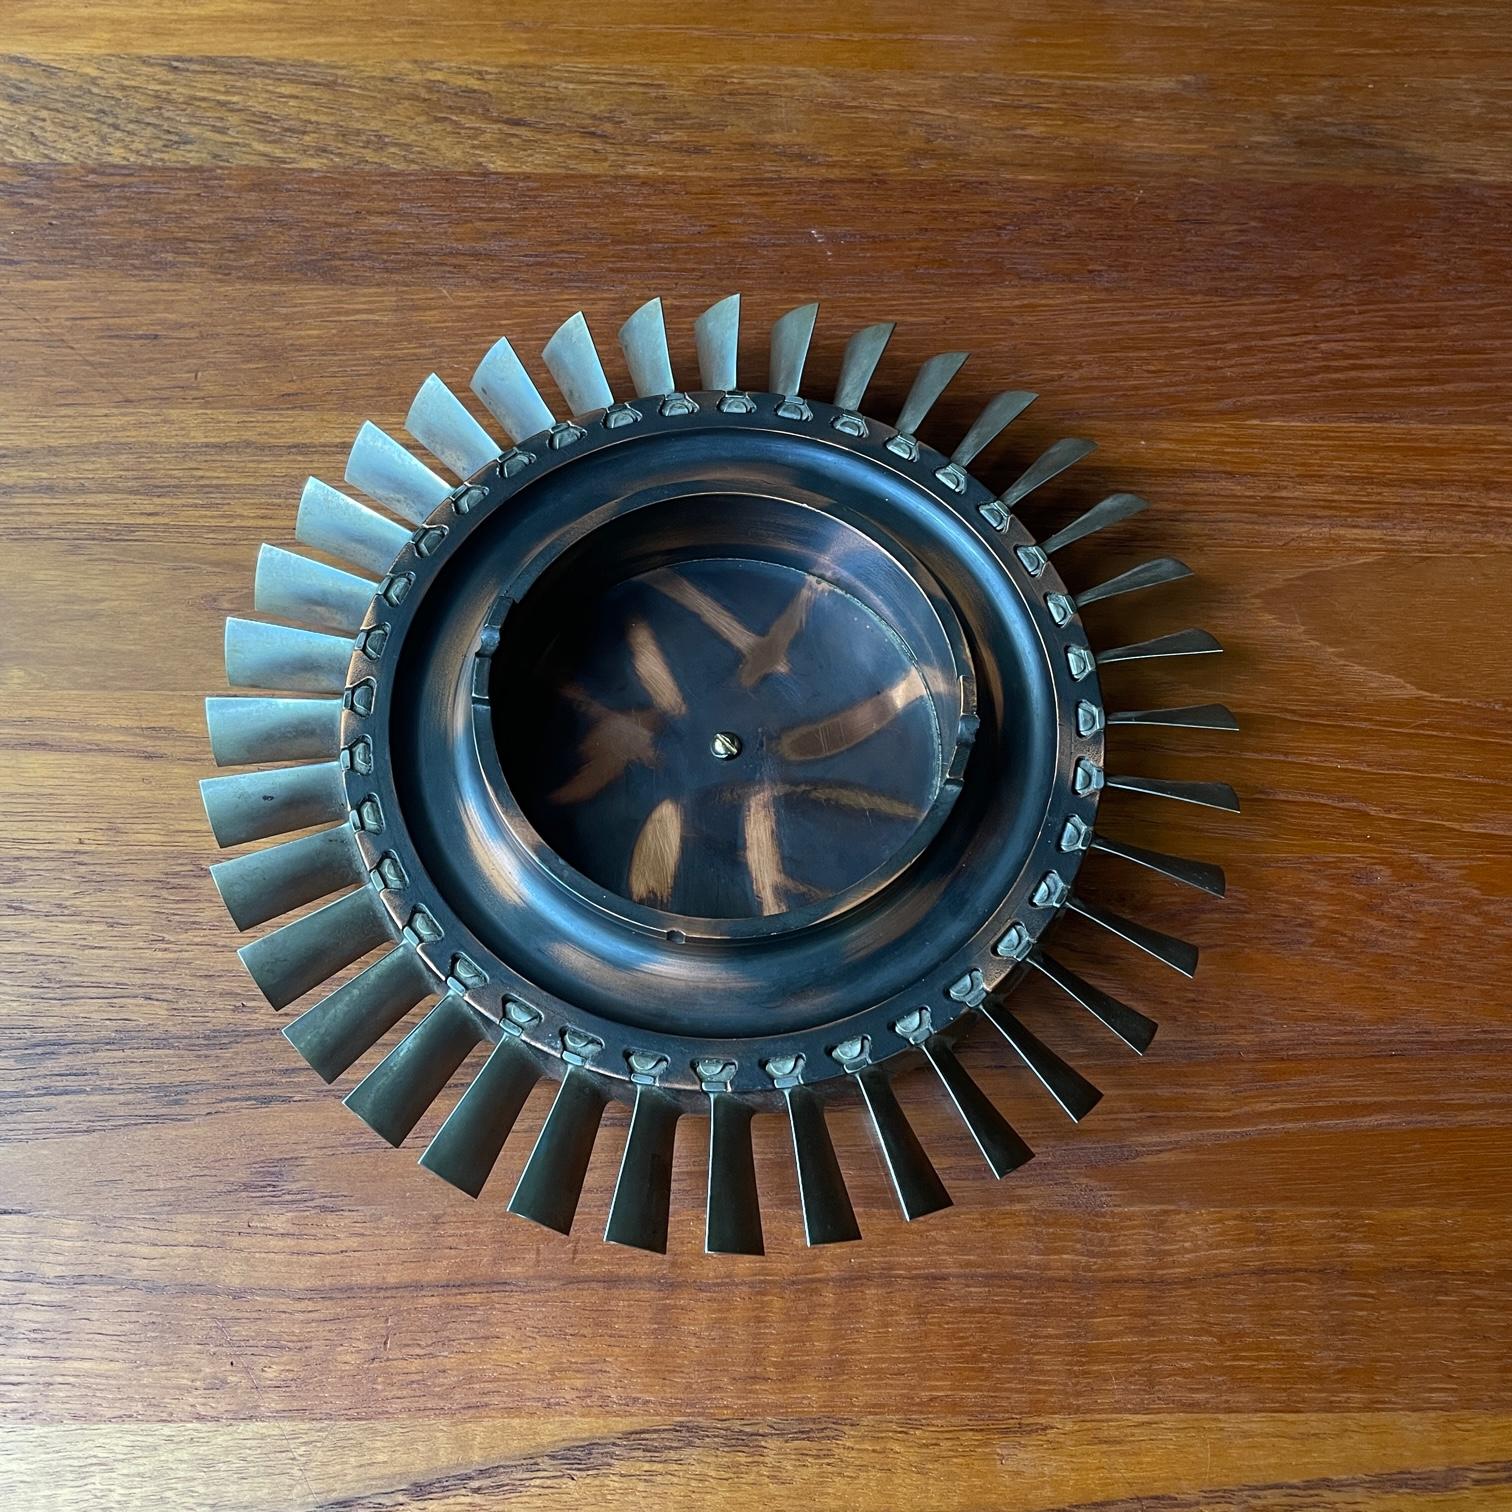 Mid-Century Modern Japanned Turbine Engine Dish Bowl Industrial Vintage Aviation Relic For Sale